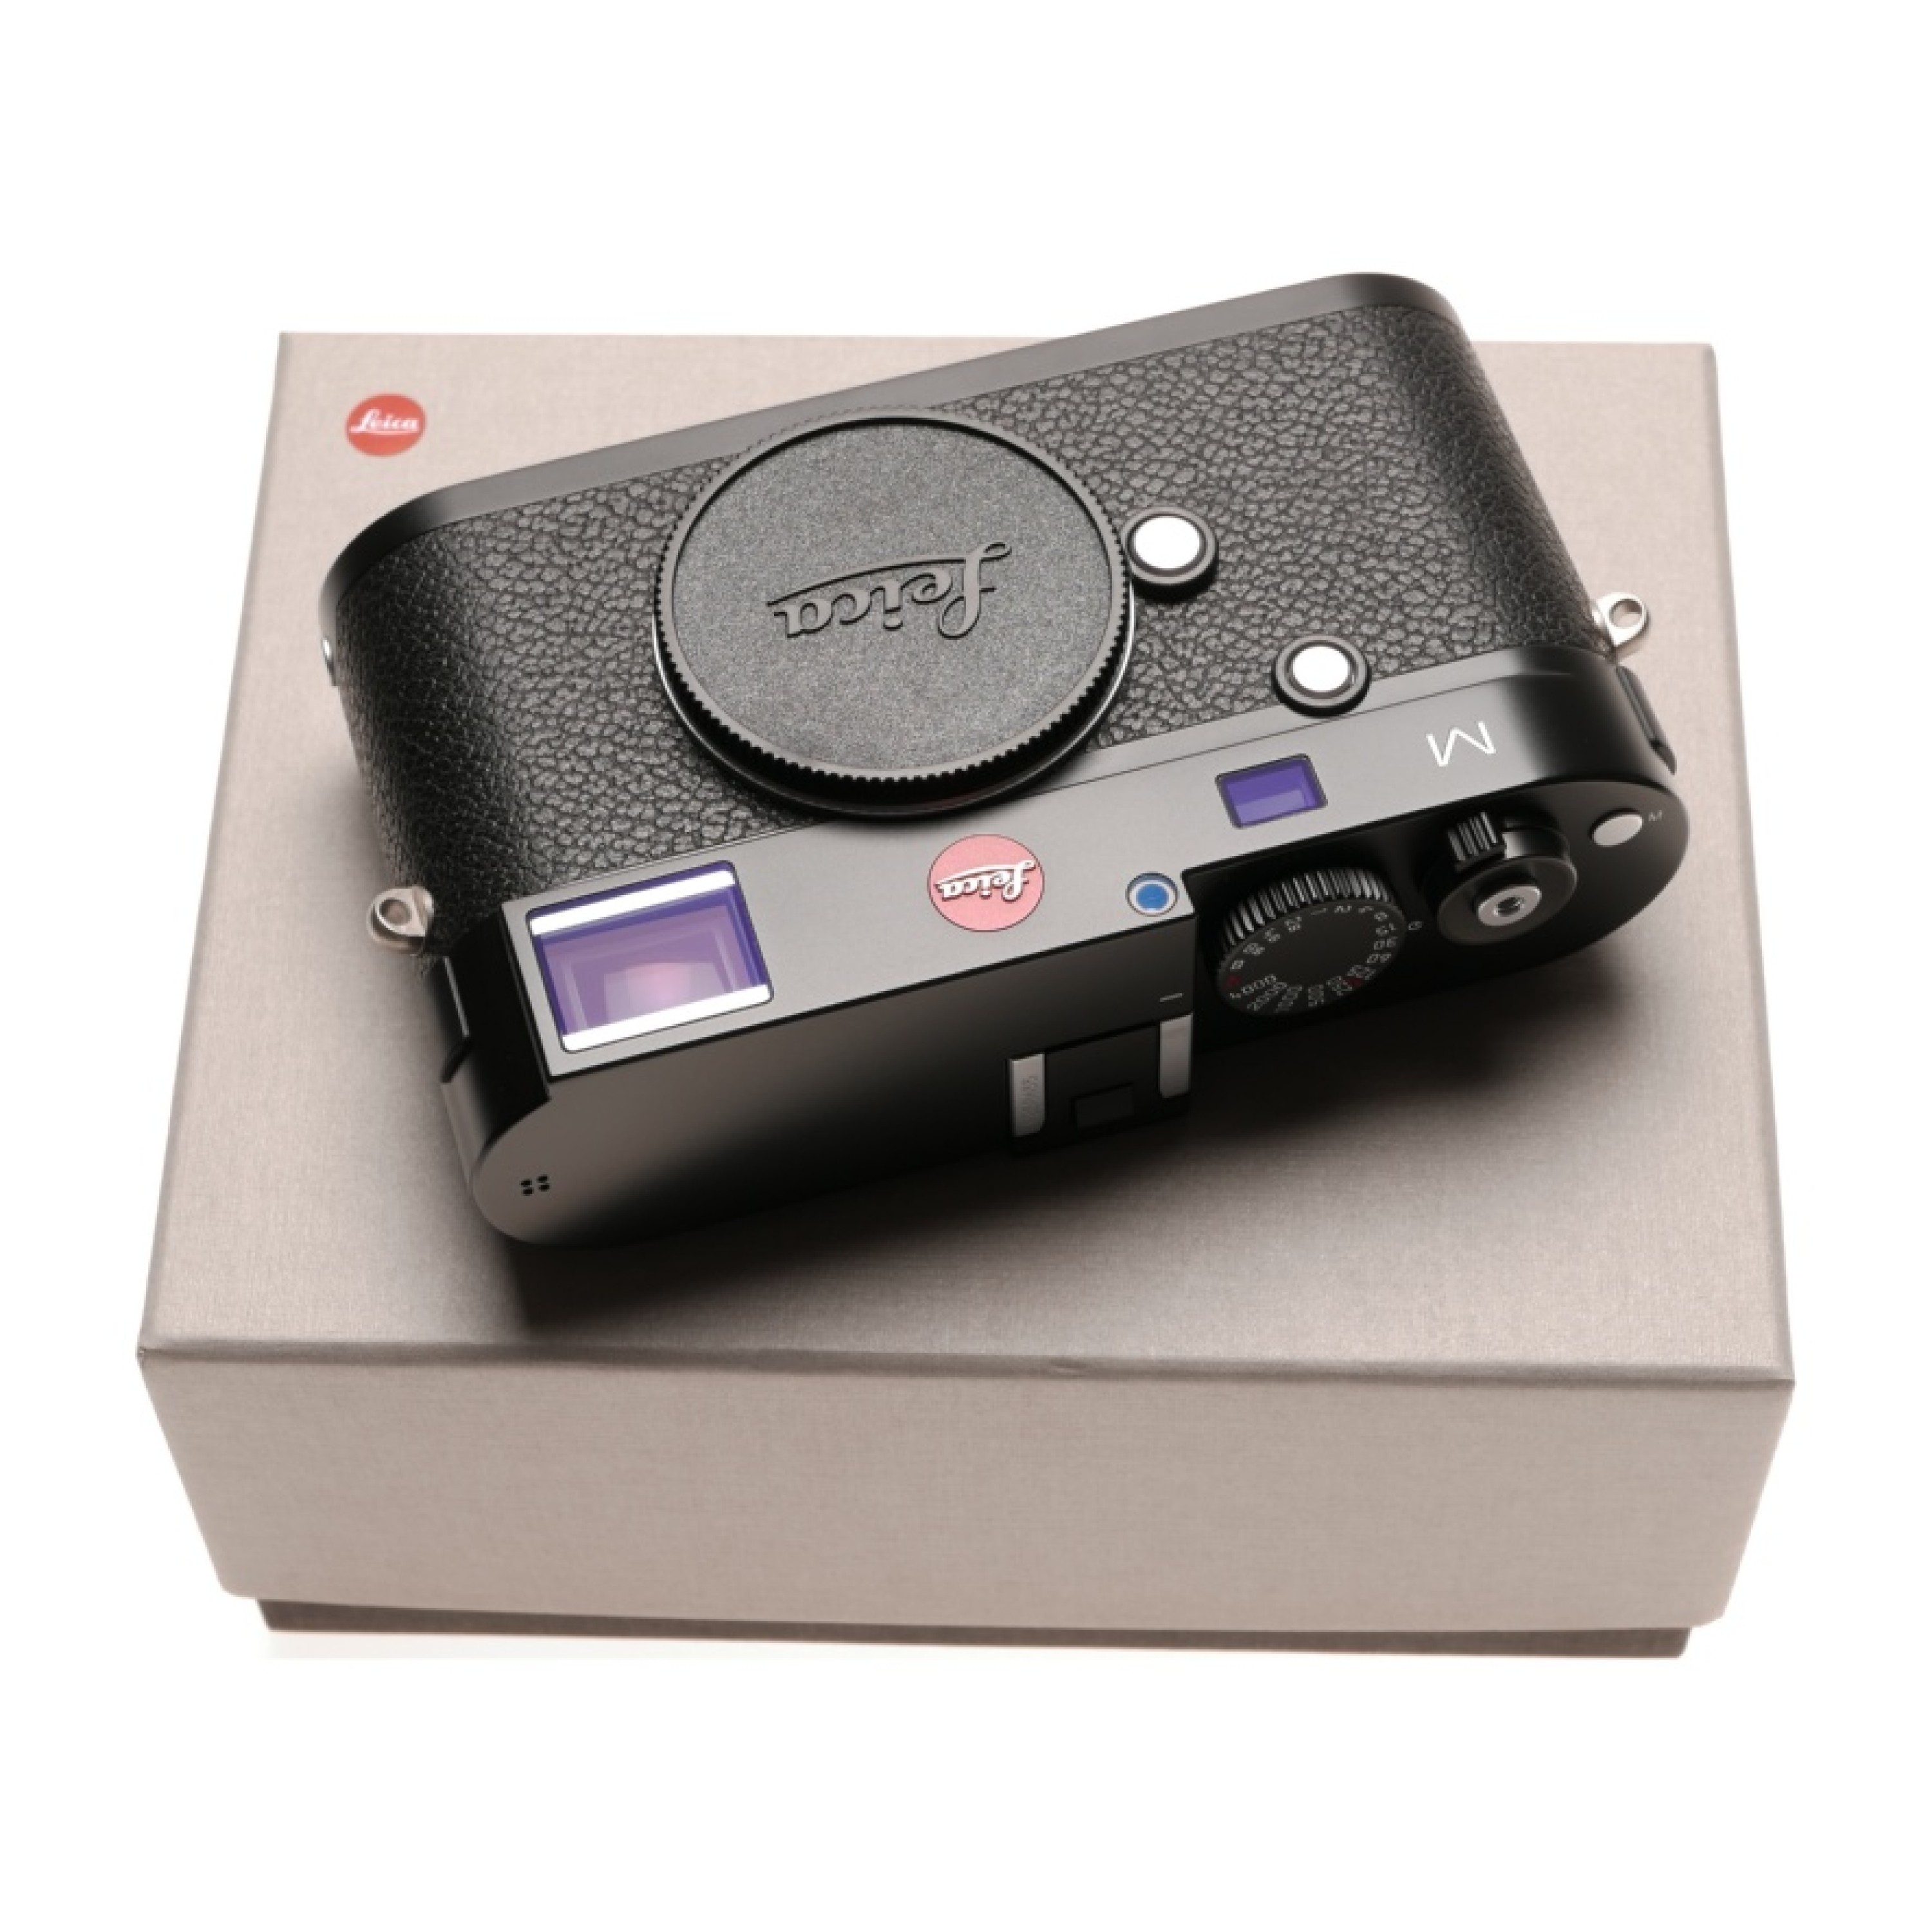 Leica M6 Rangefinder Camera (Black) - Orms Direct - South Africa